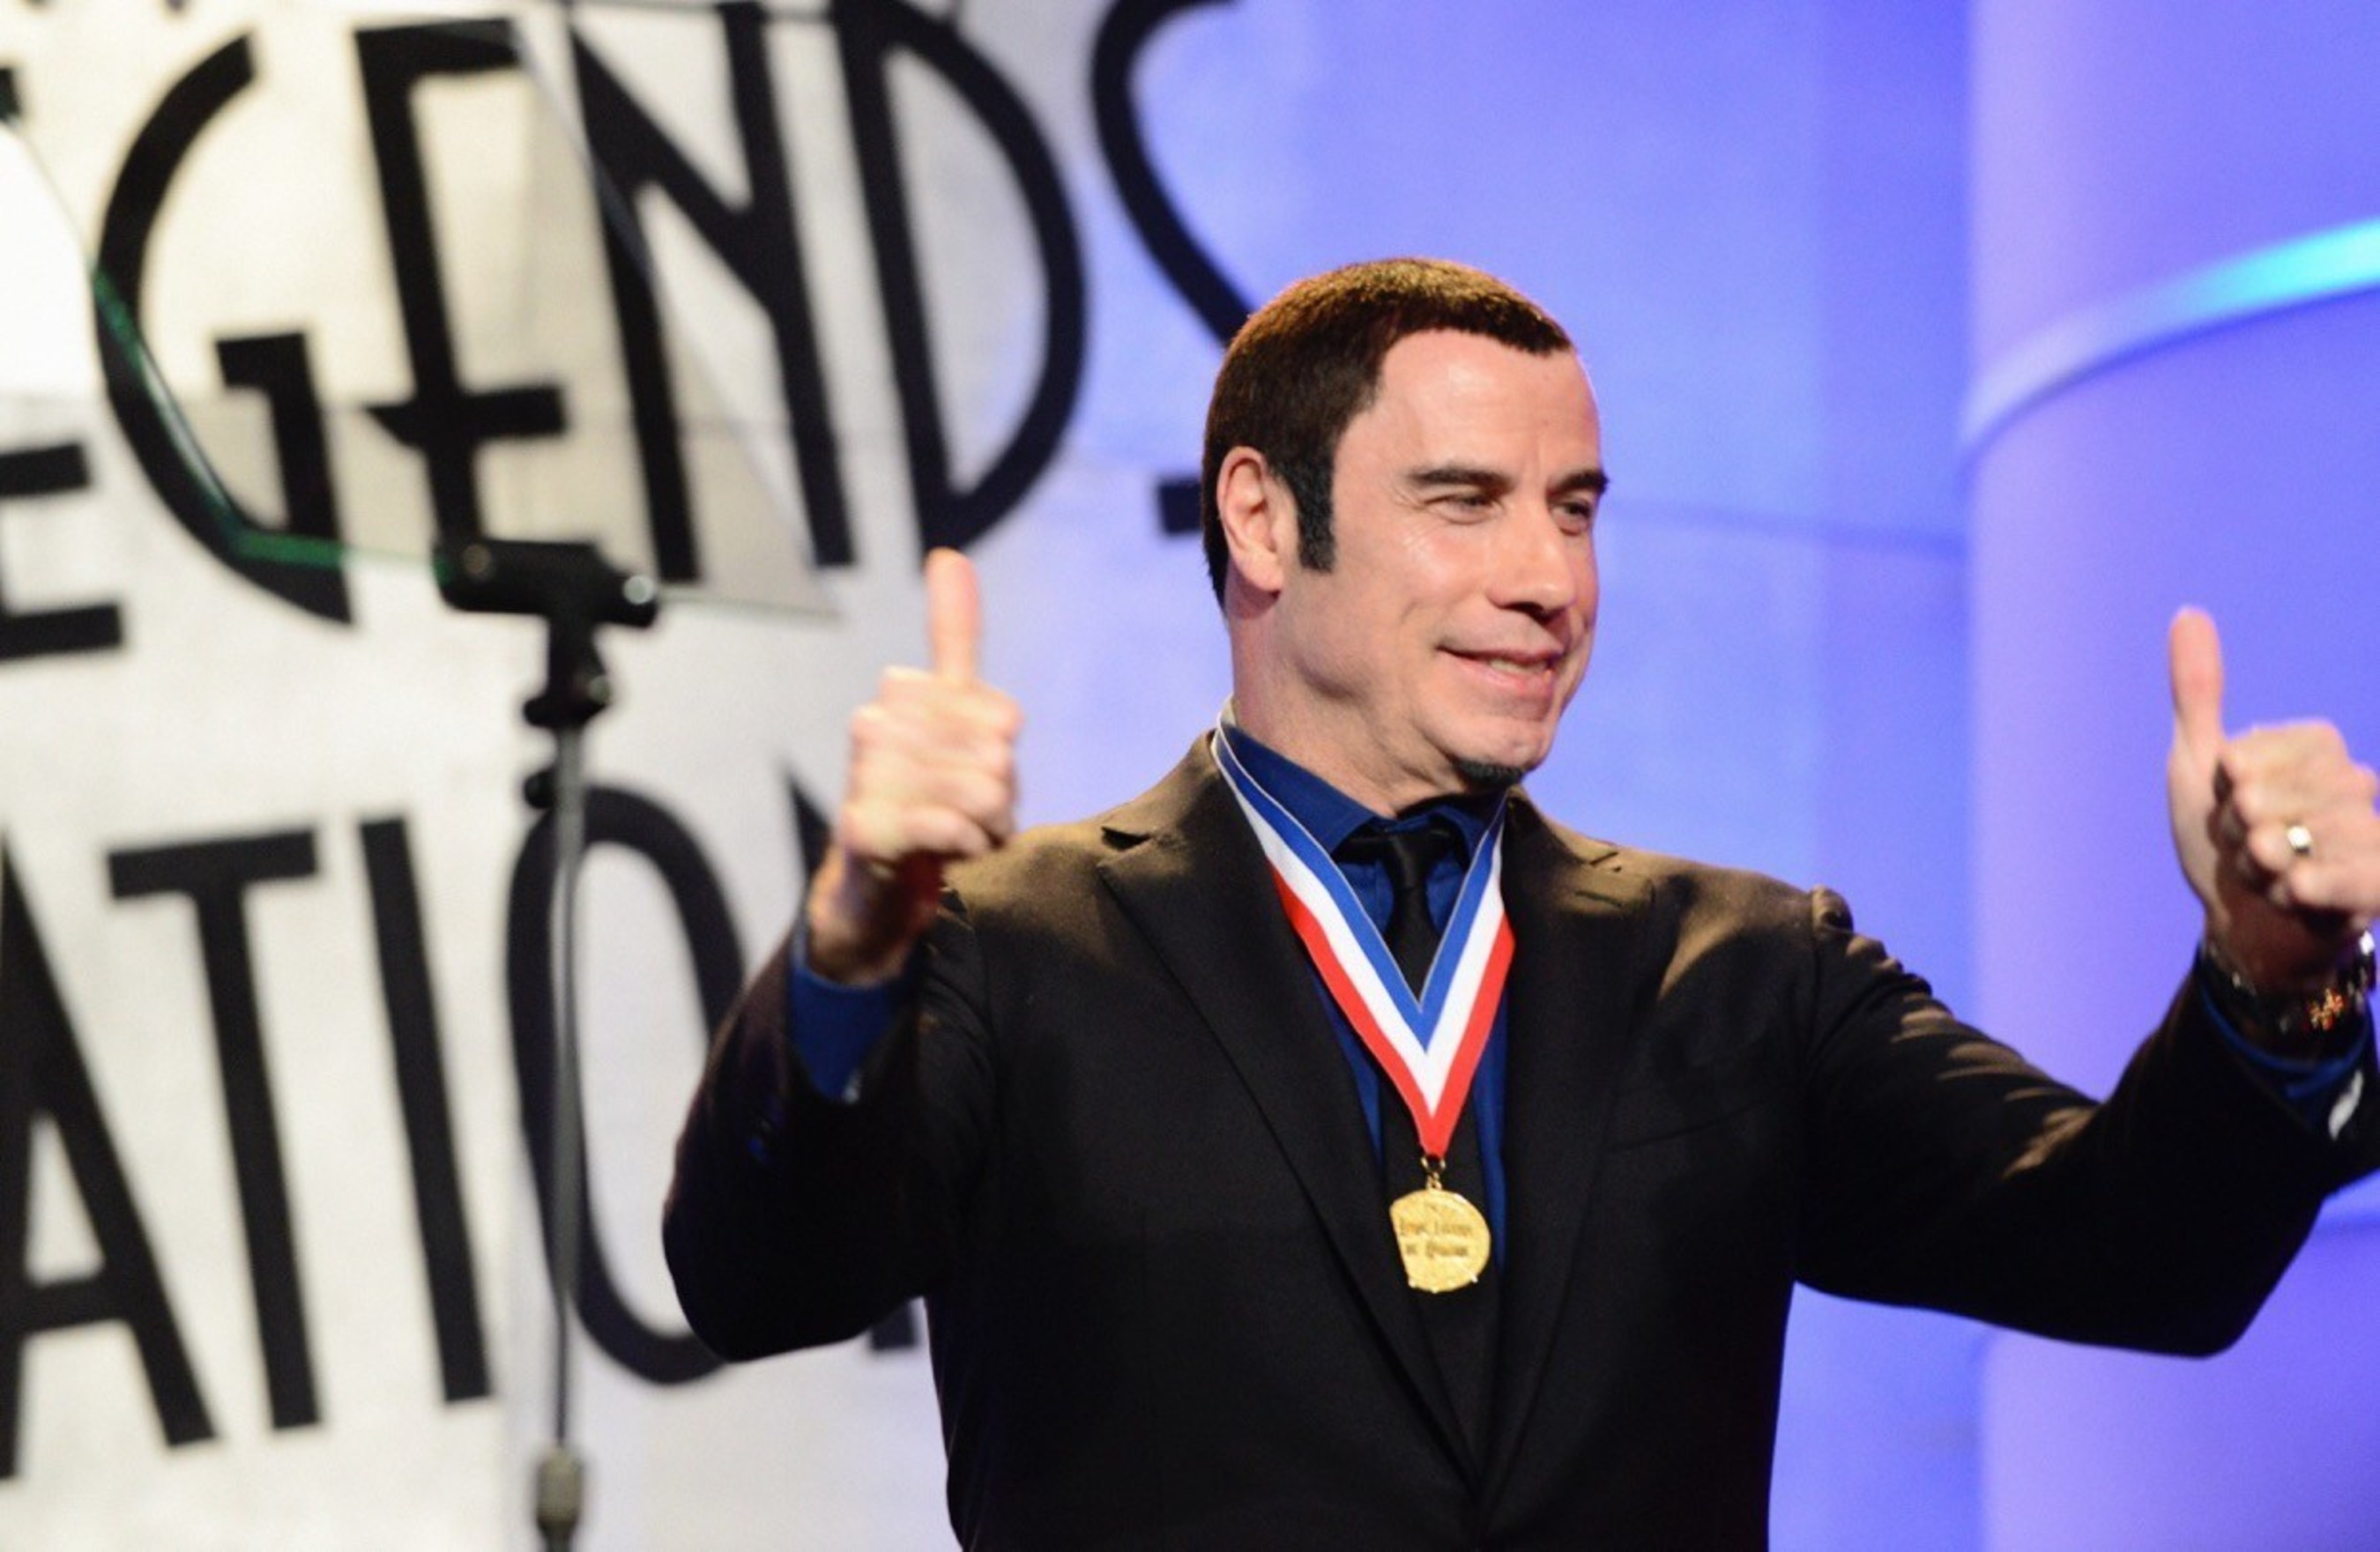 John Travolta, the "Official Ambassador of Aviation (R)," will host the prestigious "Living Legends of Aviation Awards," this Friday, January 16, 2015 at the Beverly Hilton ballroom in Beverly Hills, Calif.